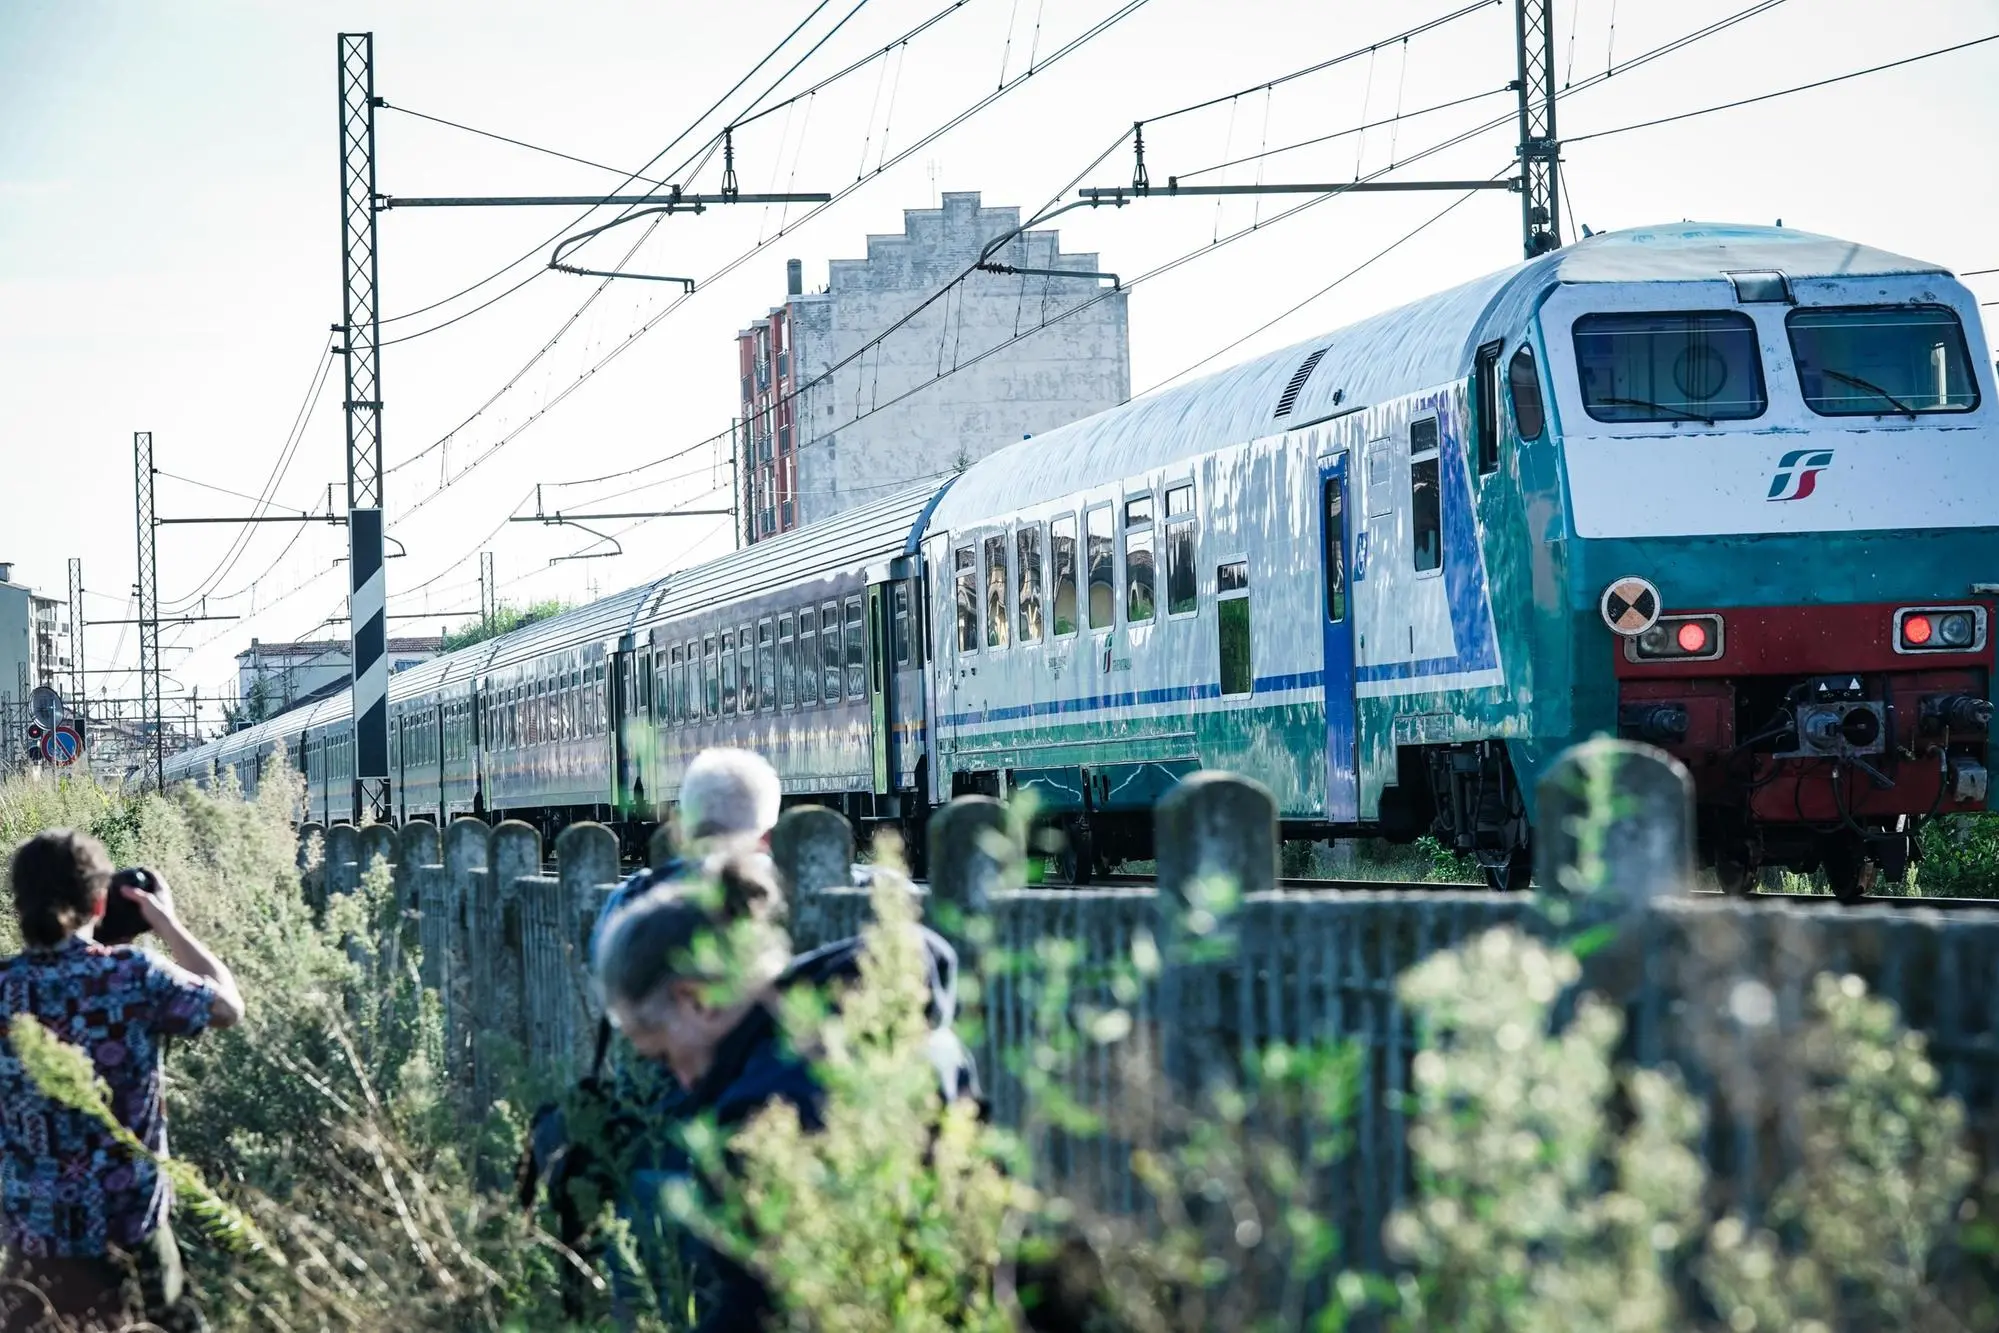 The train that overwhelmed the 5 workers stopped at the Brandizzo station in Turin, Italy, 31 August  2023. Five of the workers were killed in the incident, and two were injured. ANSA/TINO ROMANO